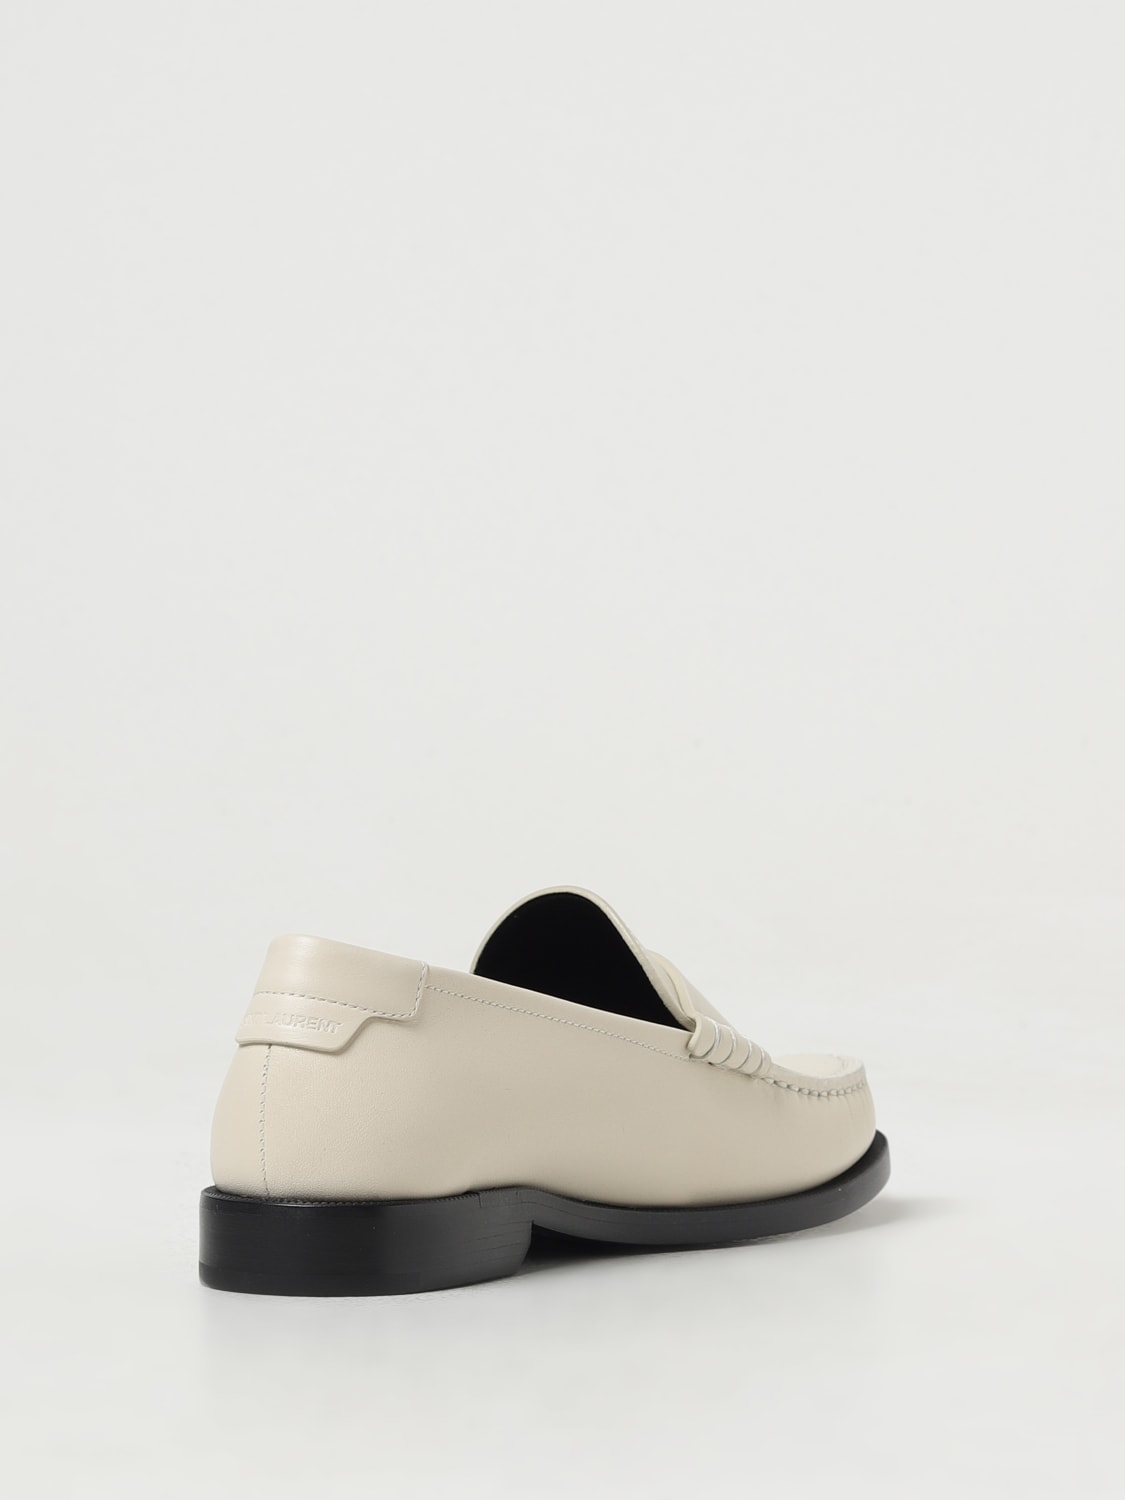 Saint Laurent LE Loafer Penny Slippers Pearl